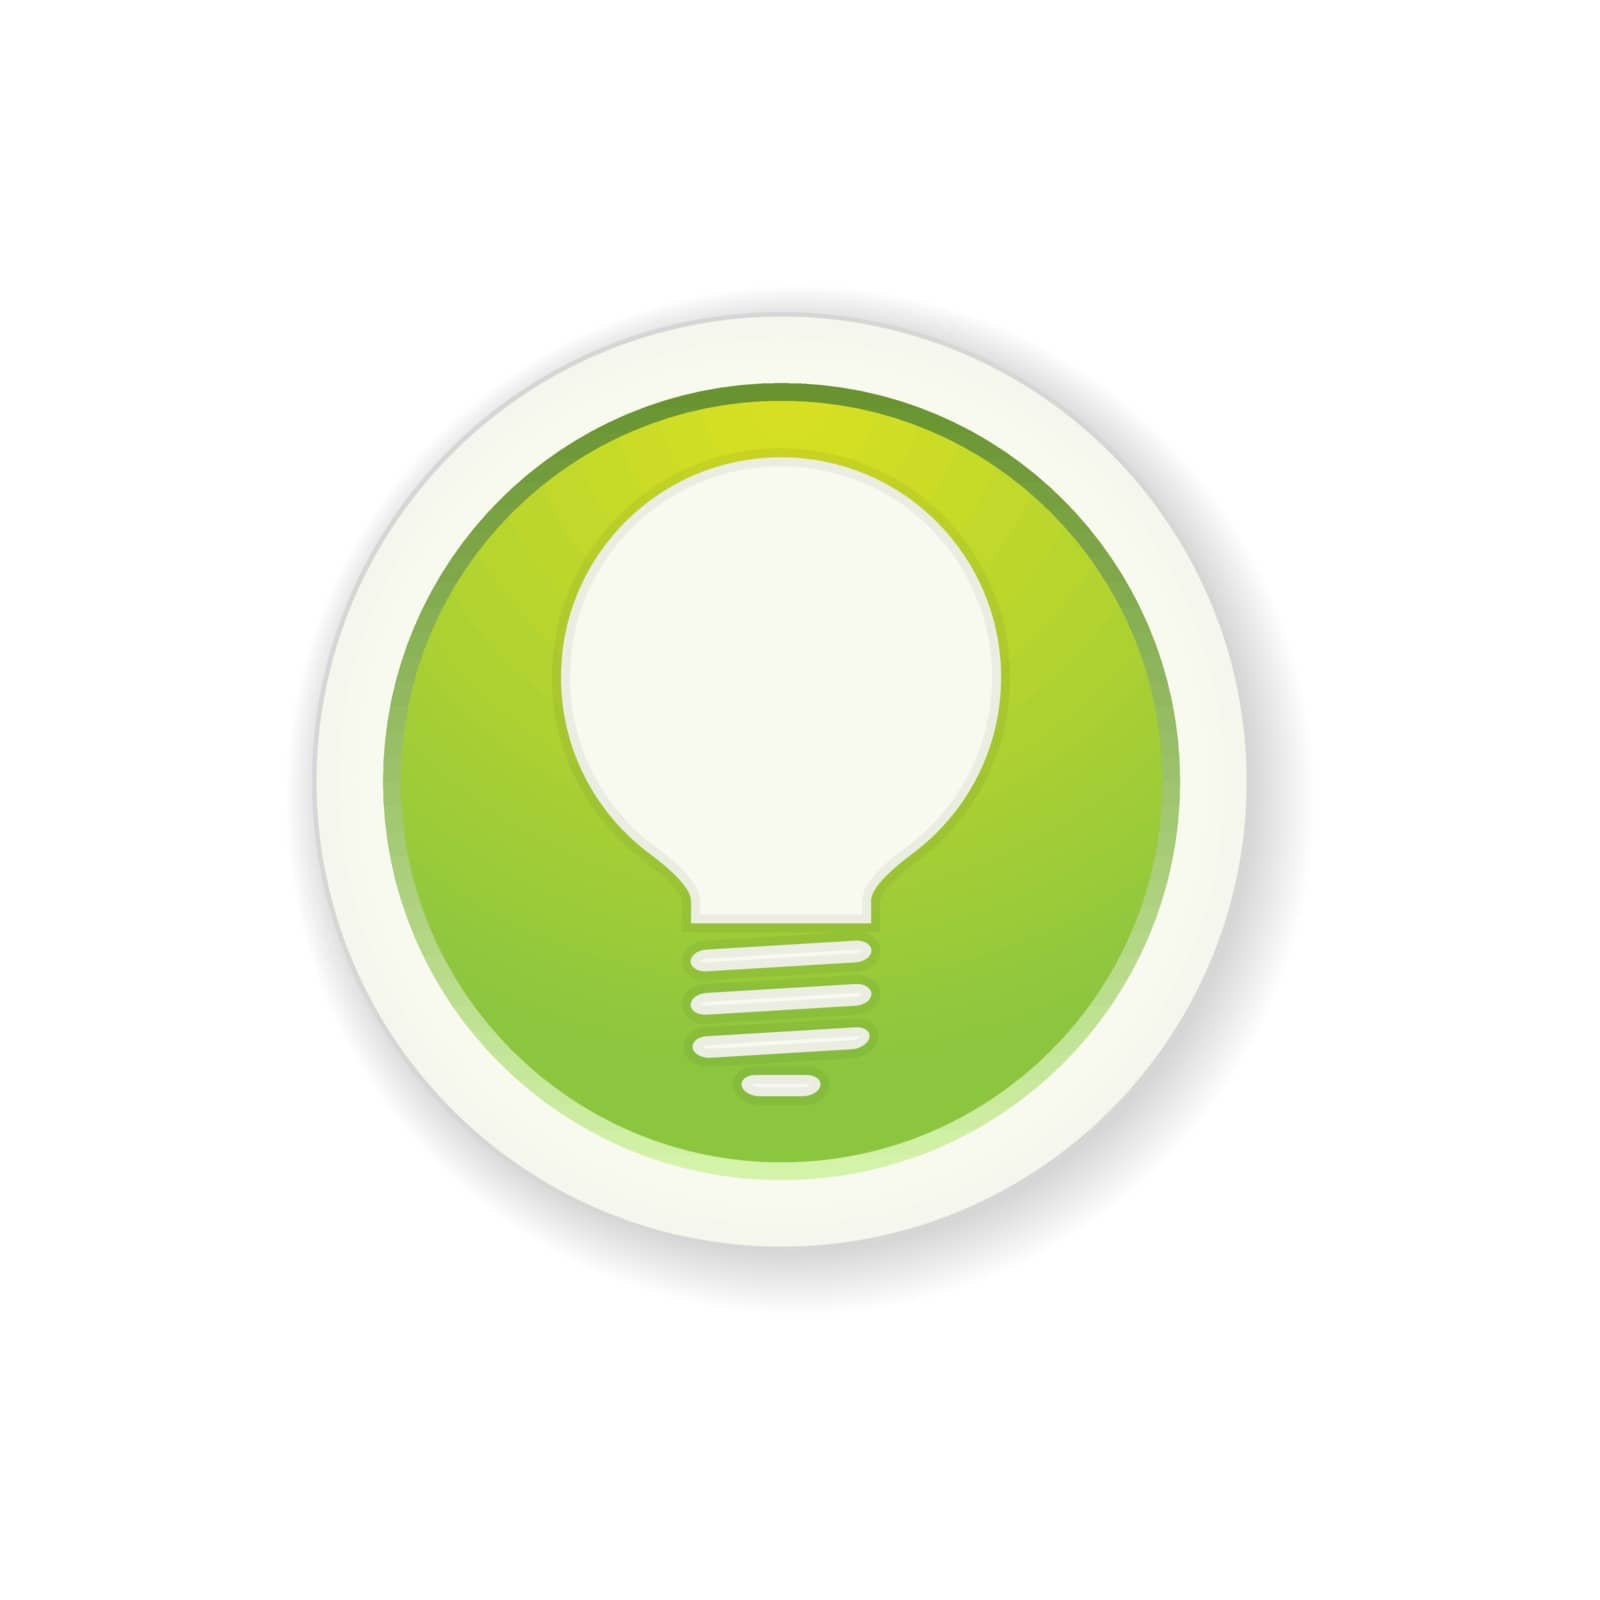 the glossy bulb icon